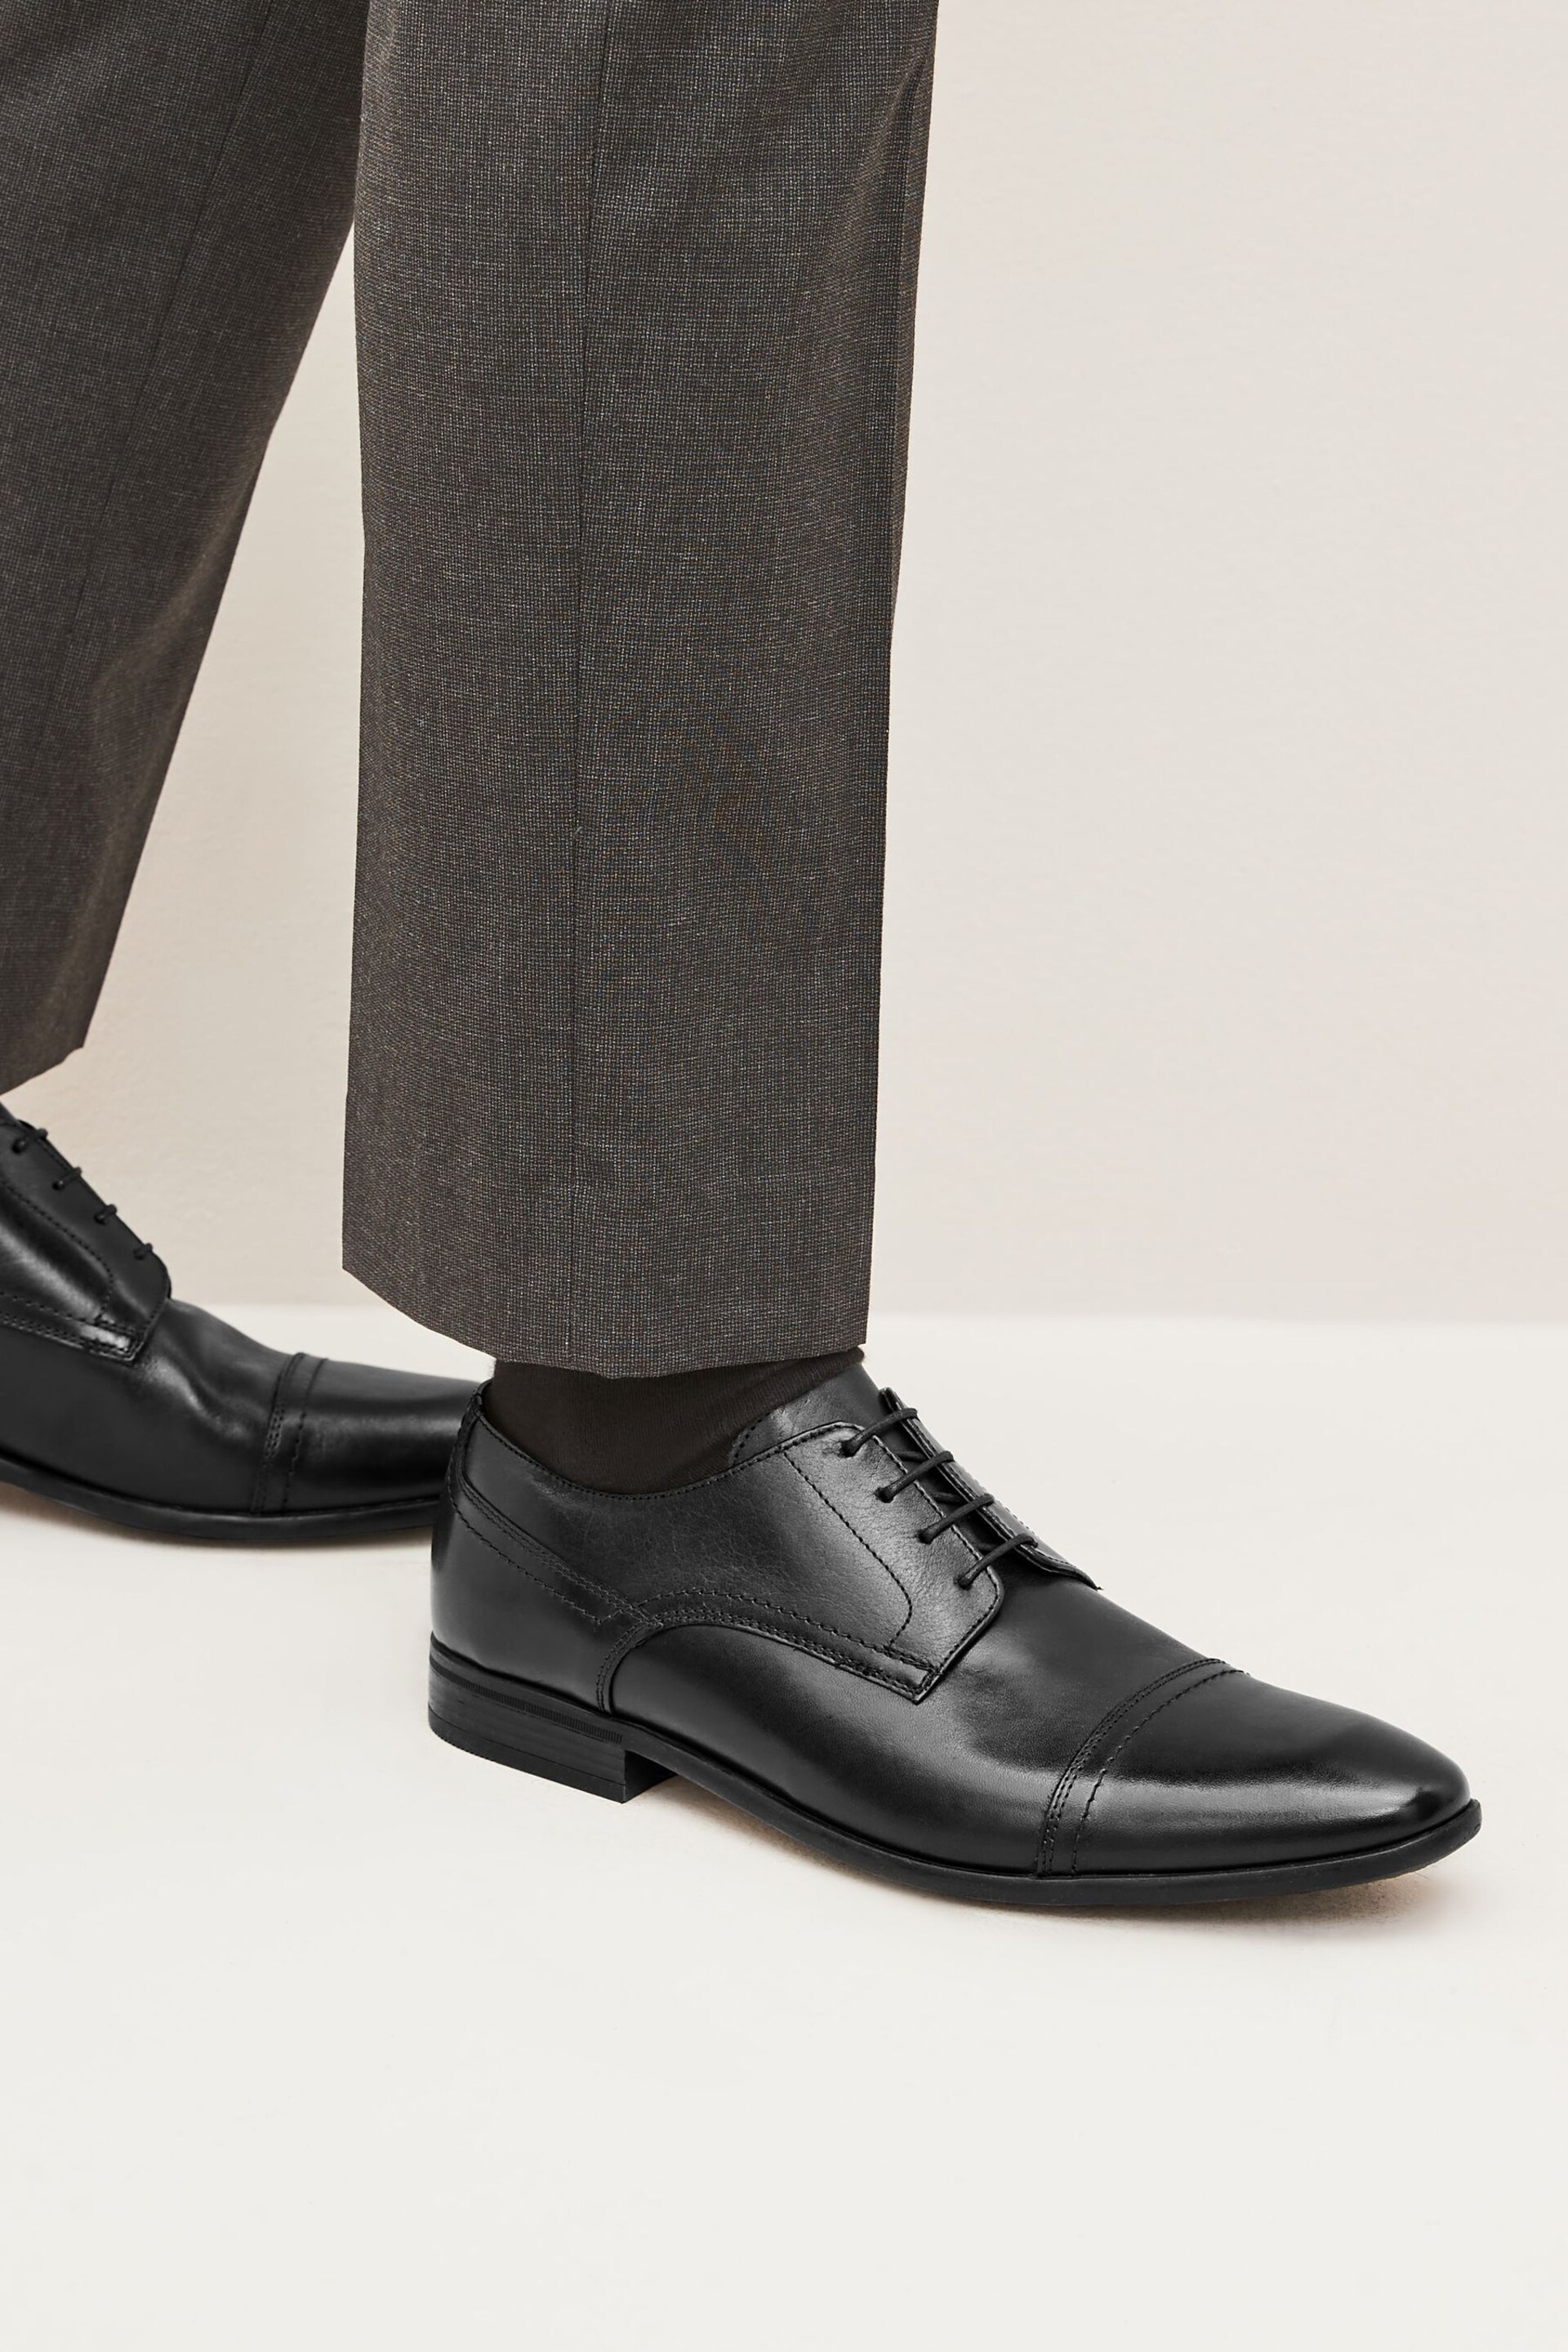 Black Leather Derby Toe Cap Shoes - Image 1 of 7